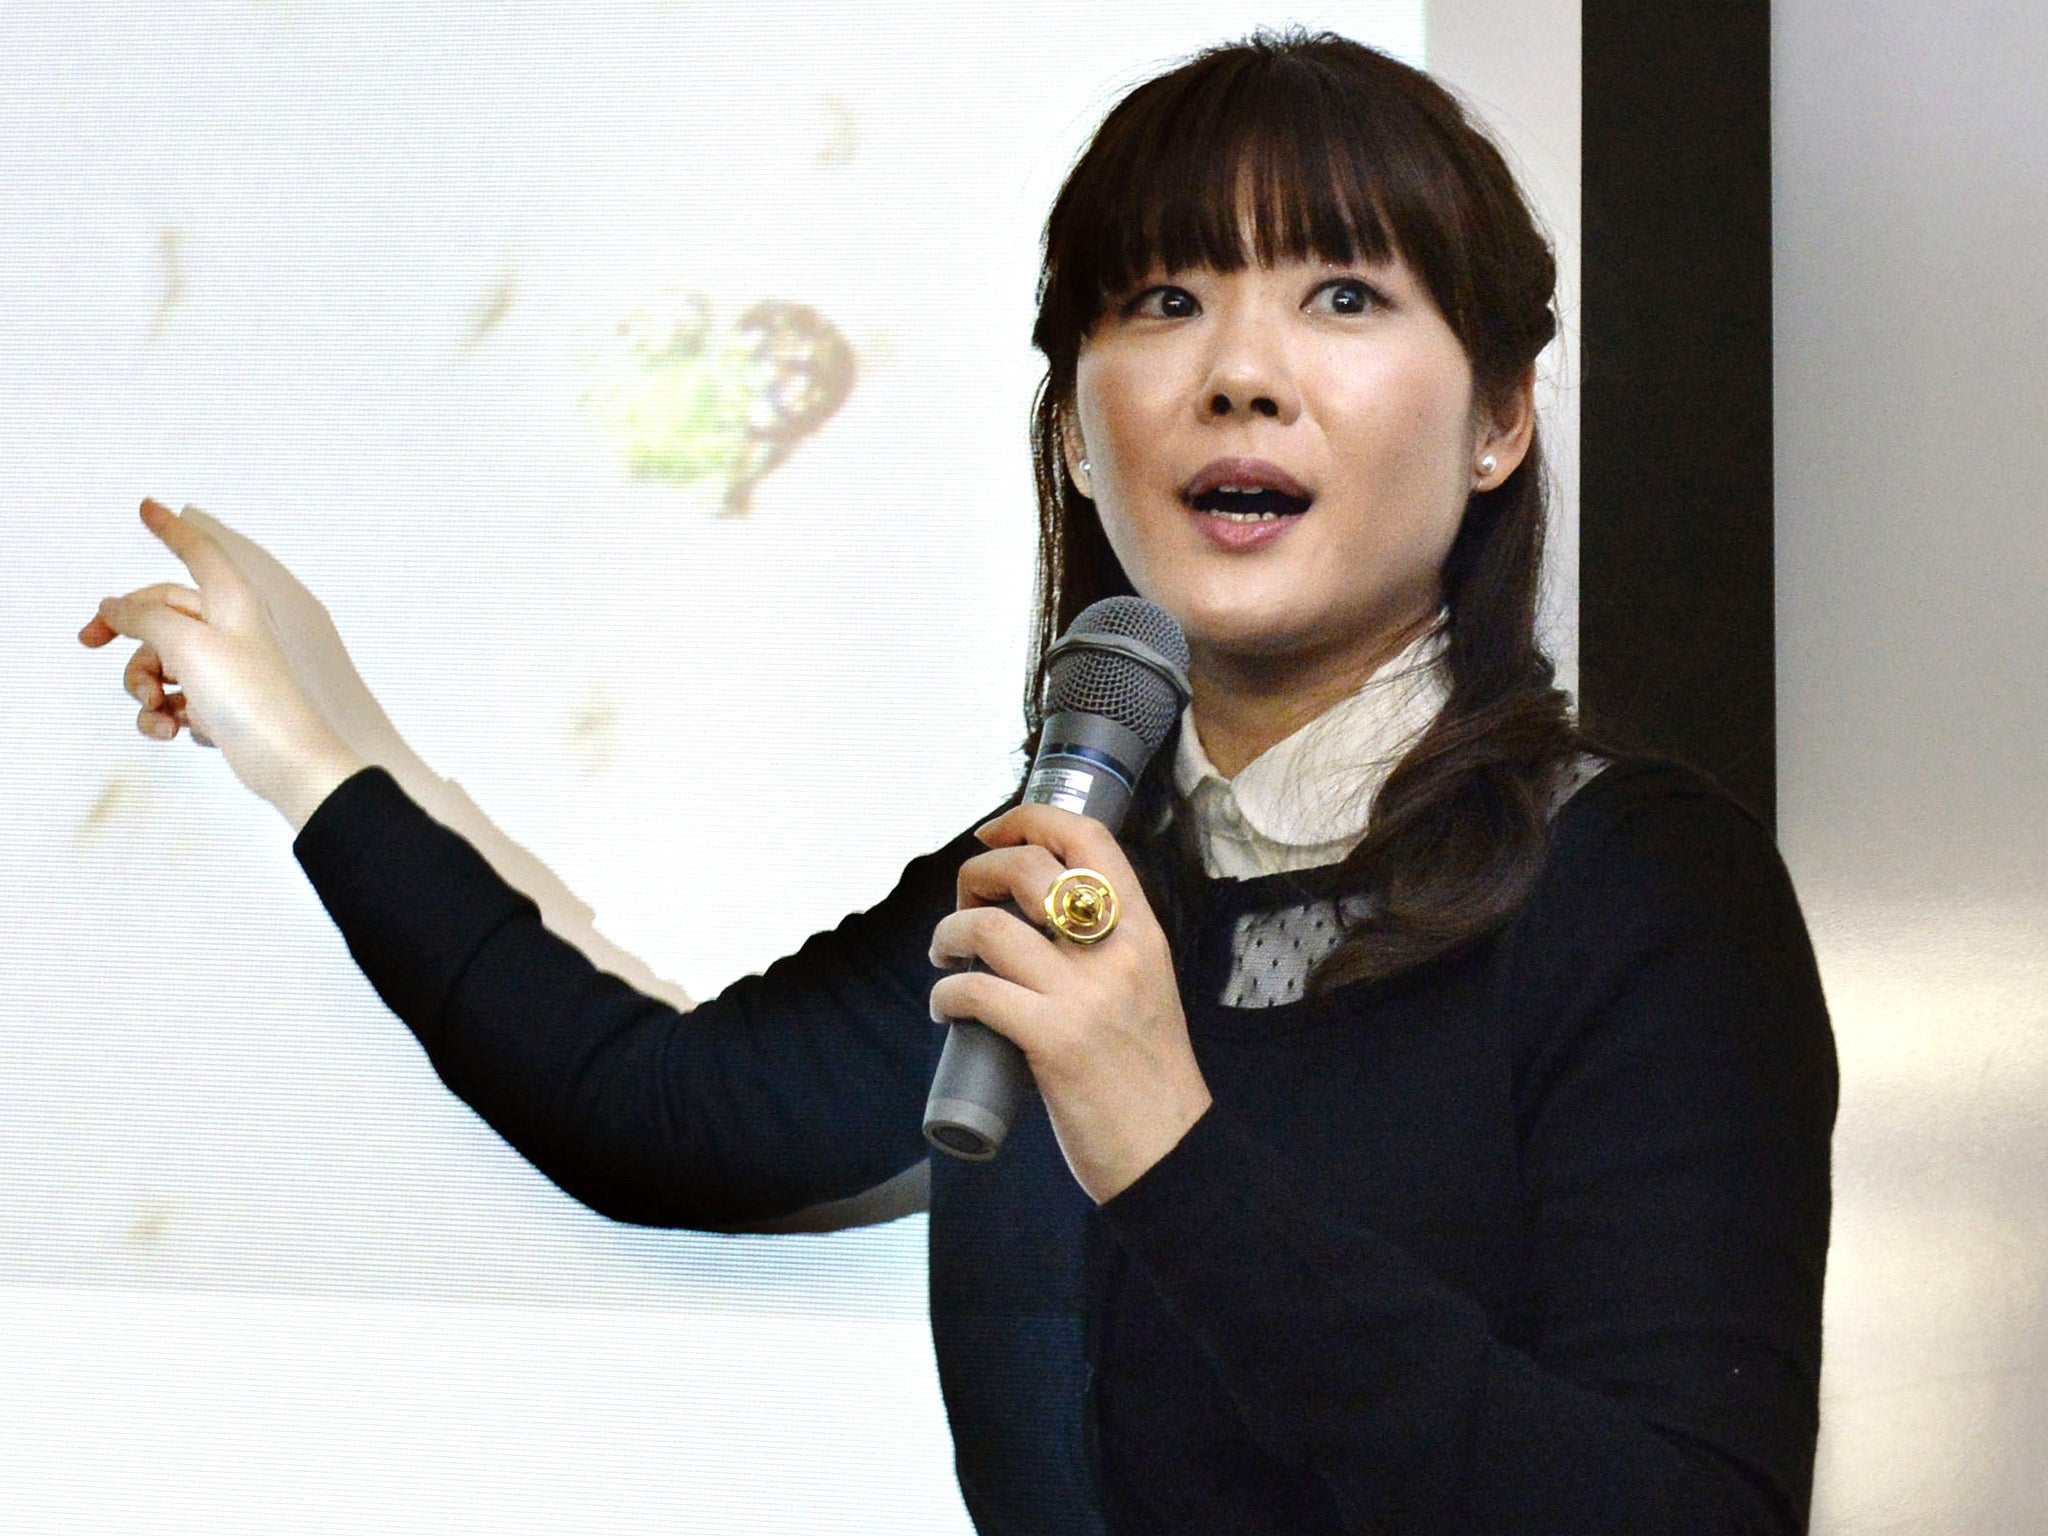 Haruko Obokata speaking about her research paper earlier this year